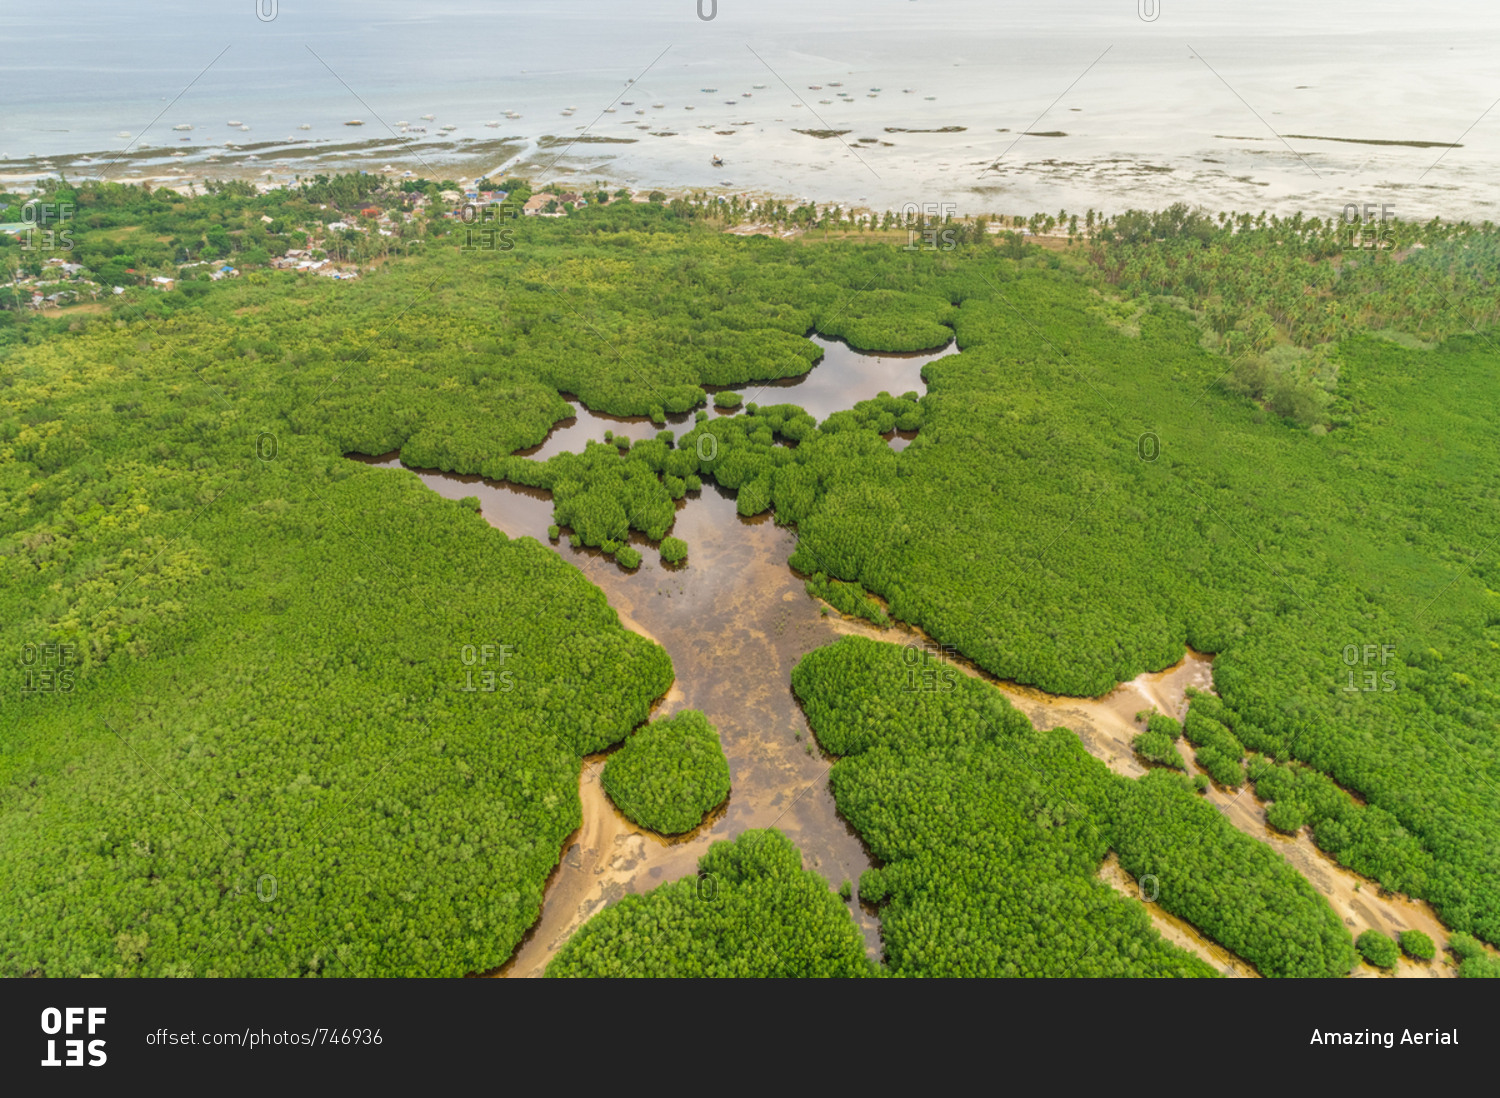 Aerial view of mangroves in Panglao, Philippines.